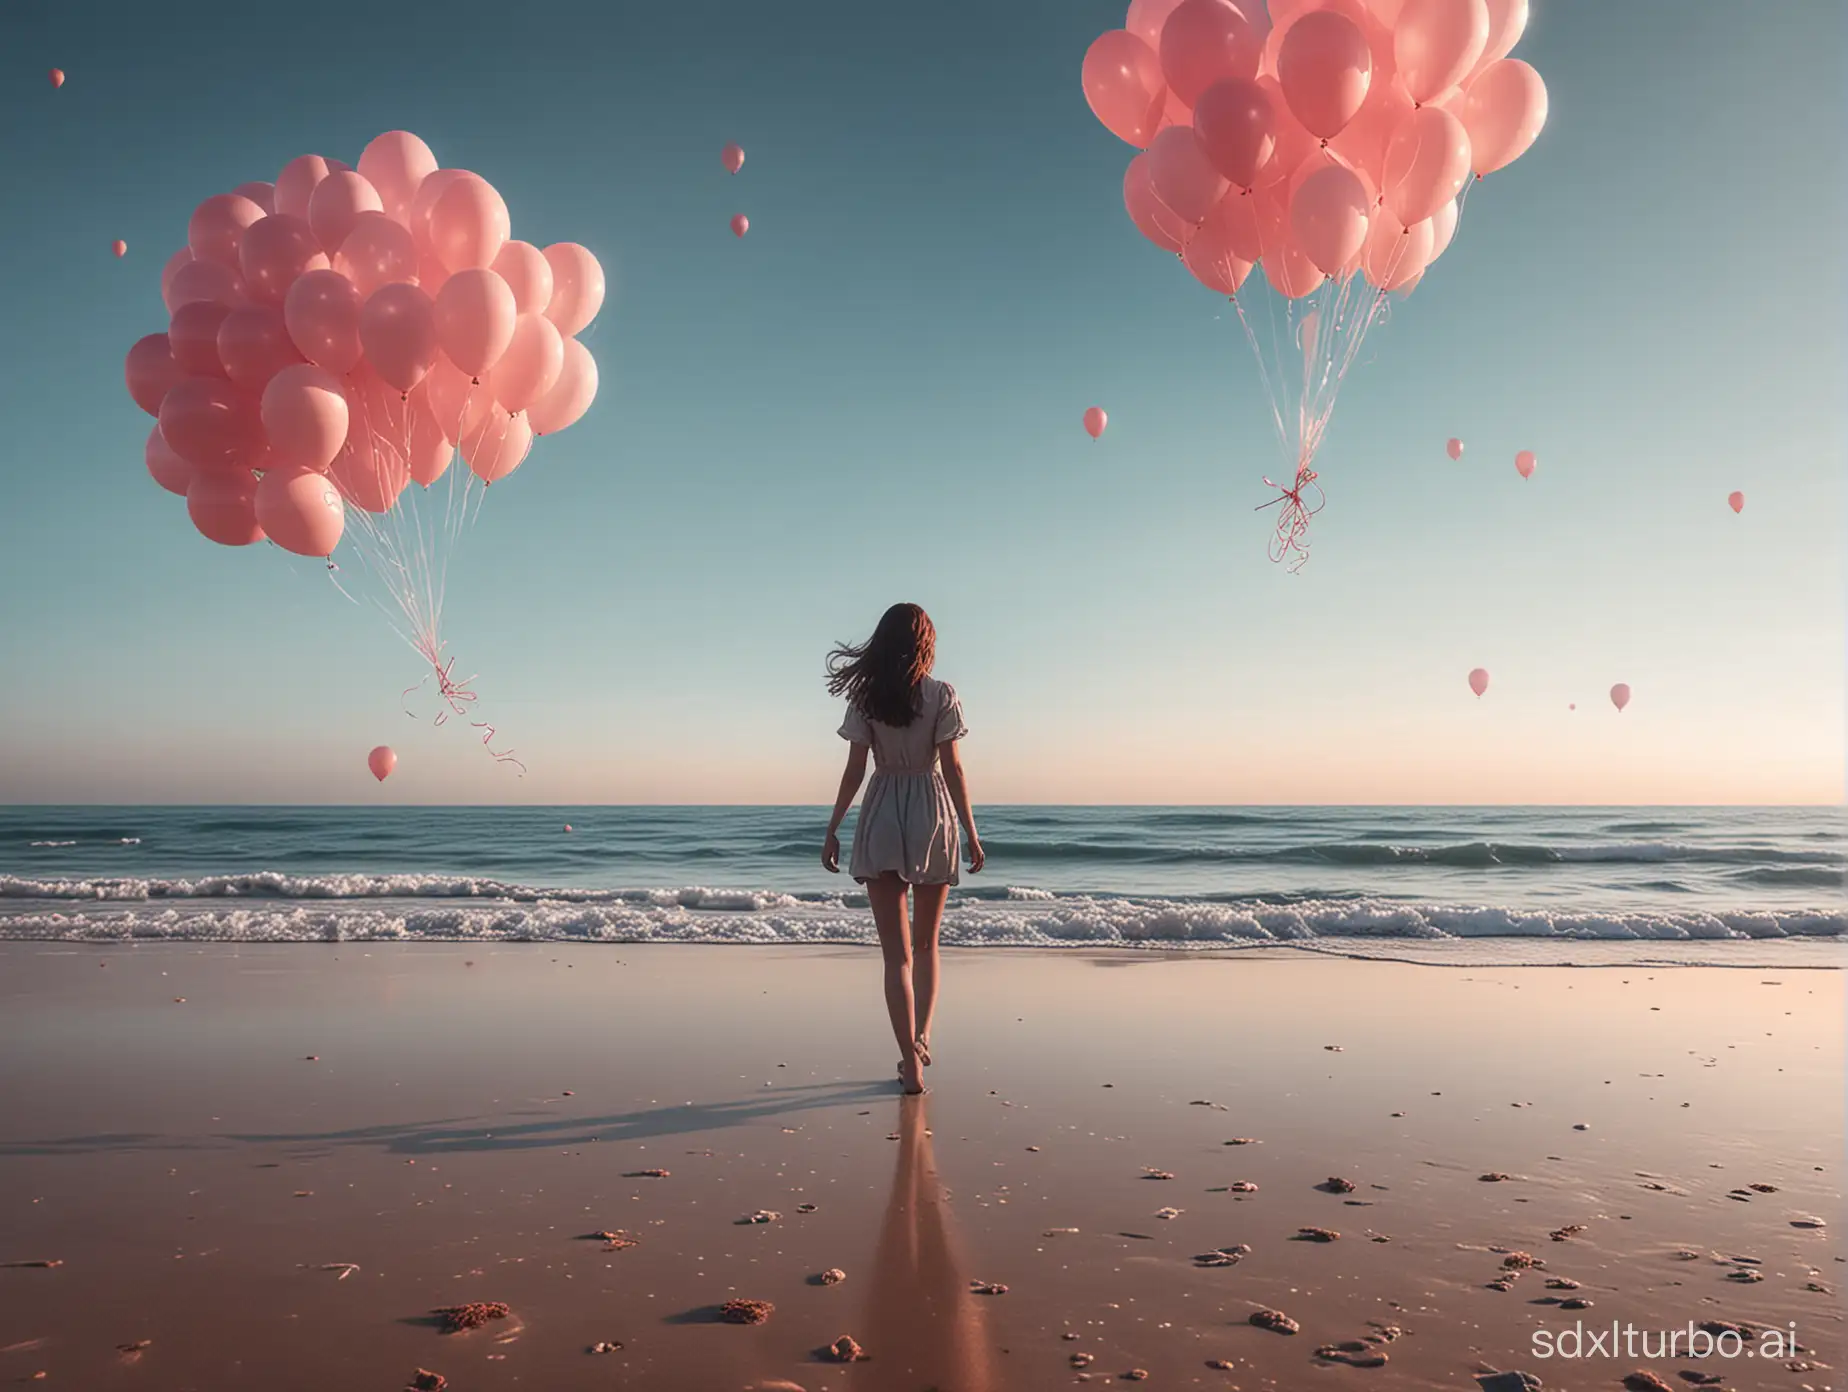 Girl-Walking-on-Beach-with-SciFi-Balloons